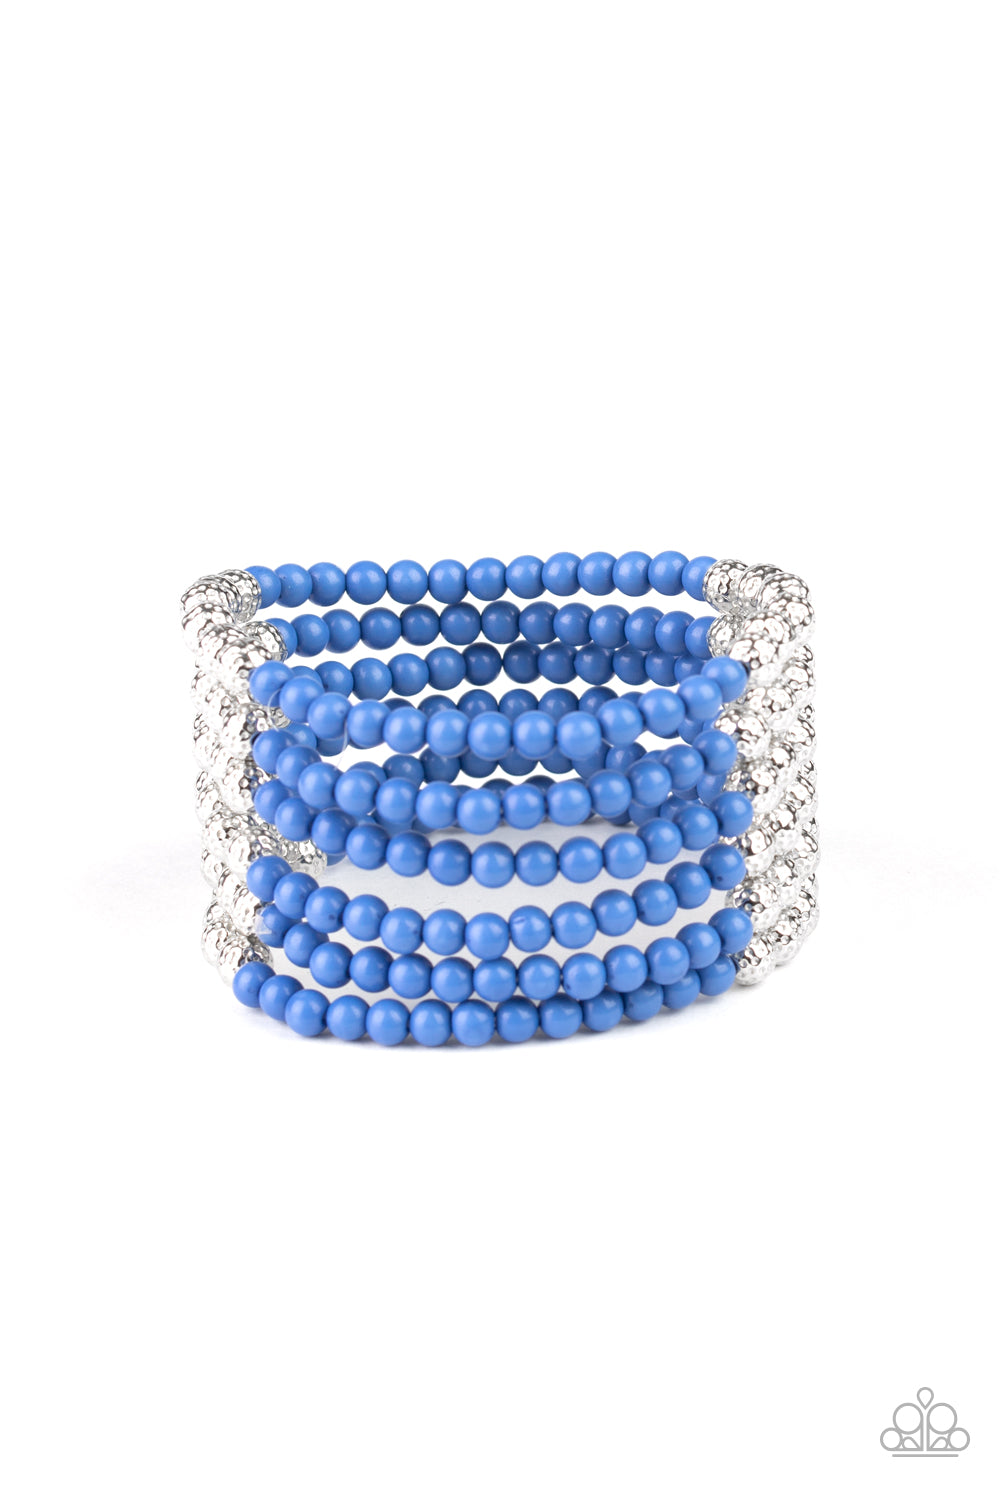 LAYER IT ON THICK - BLUE AND SILVER BEADS STRETCH MULTI LAYER BRACELET